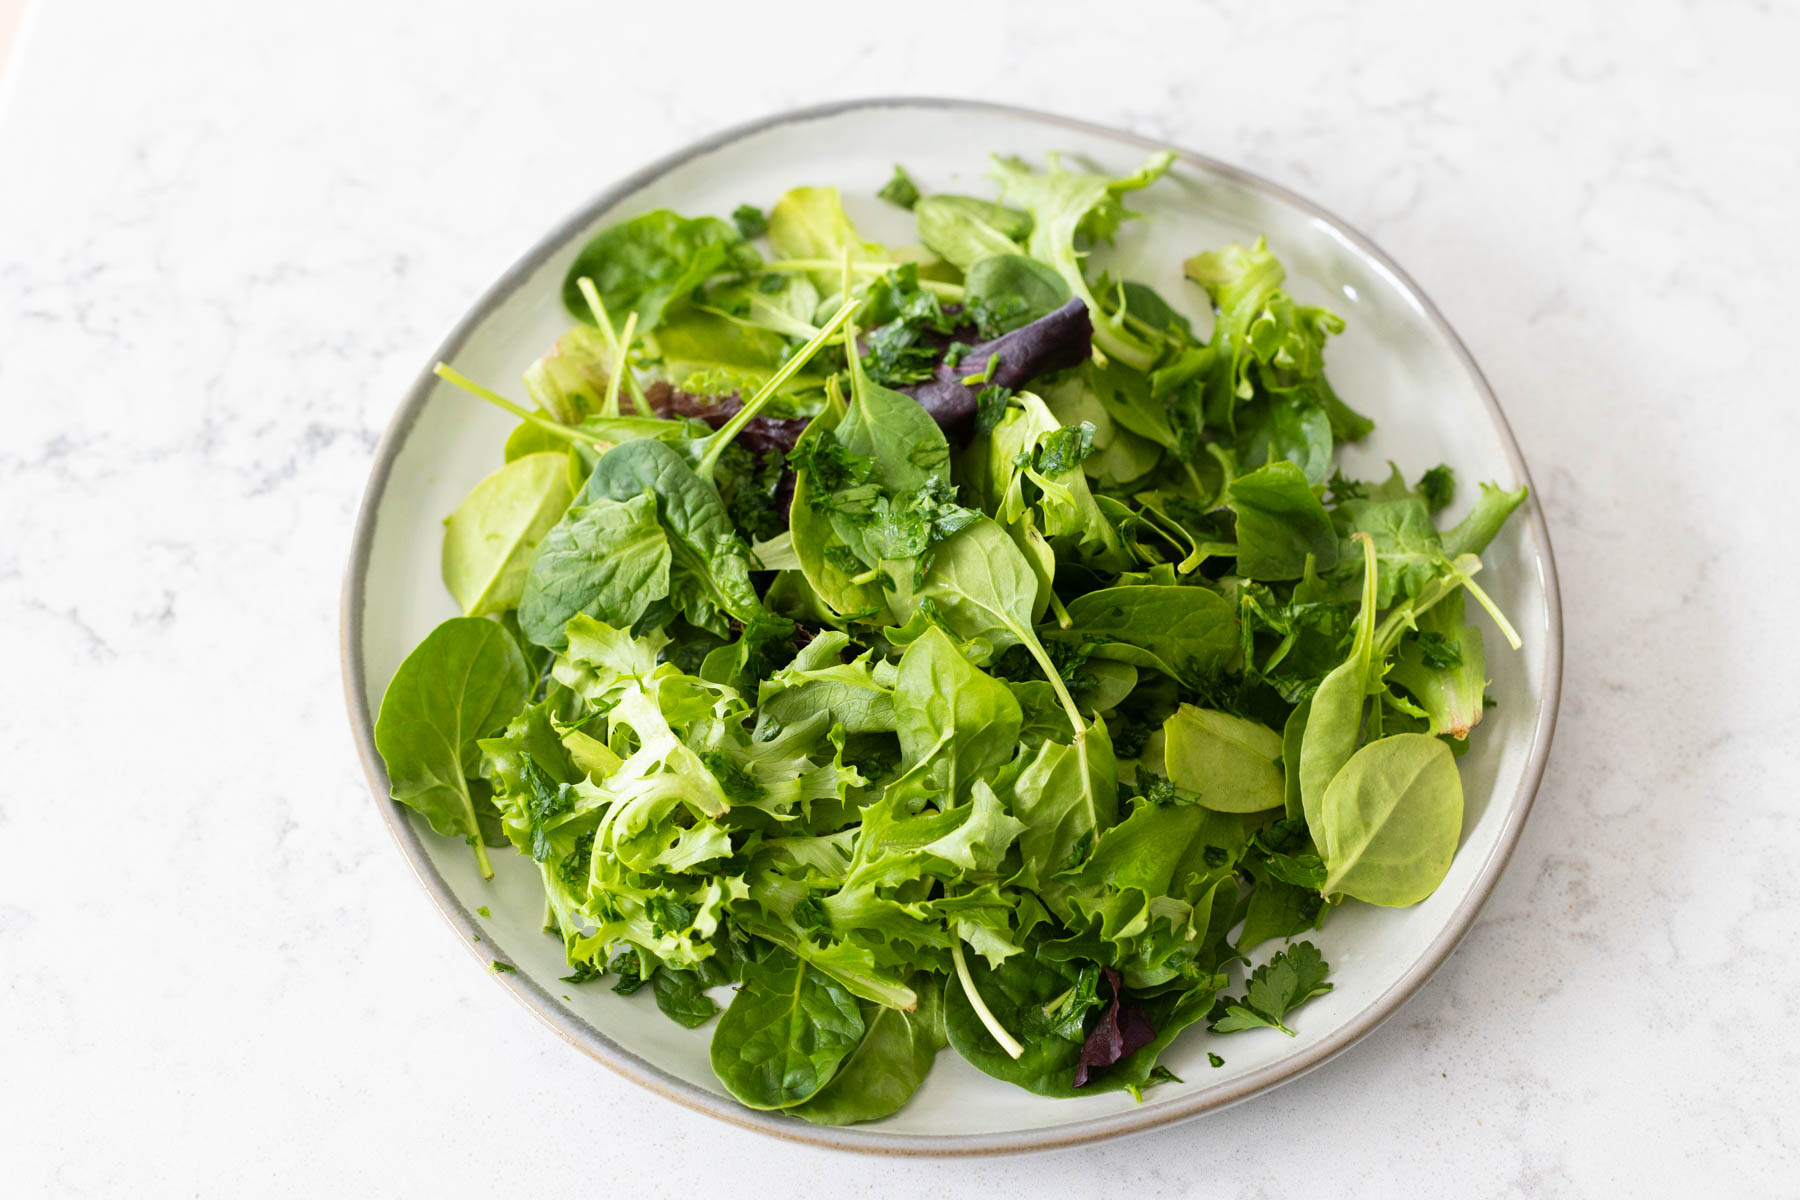 A bed of mixed spring greens and baby spinach on a plate.